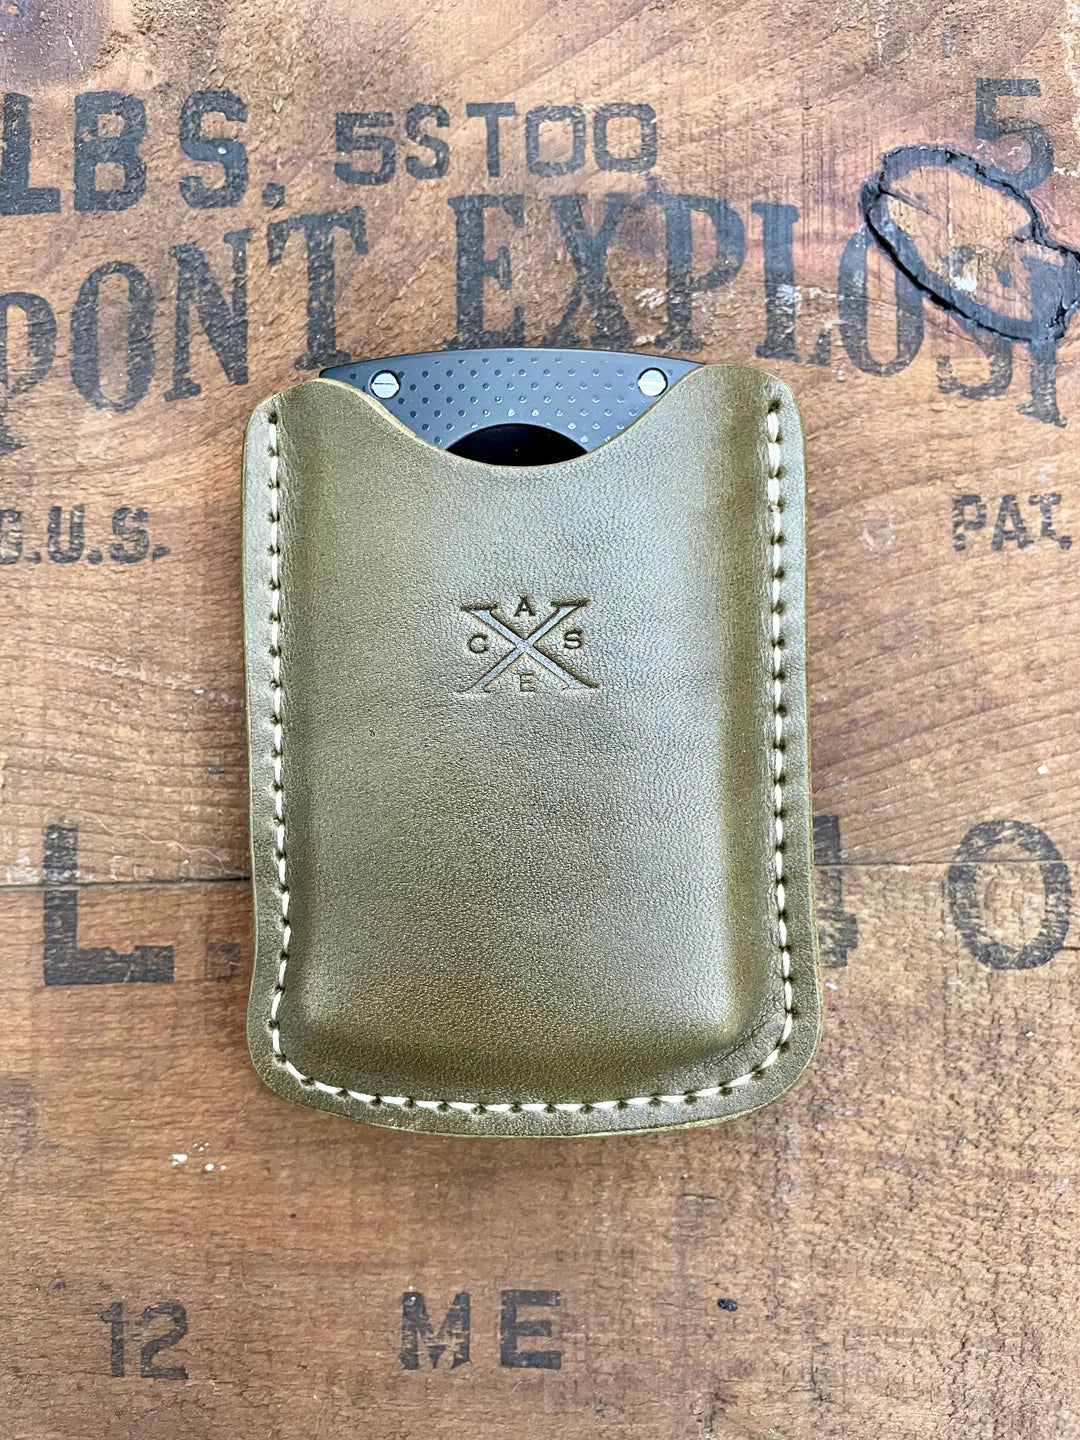 Leather Cutter Cases- ST Dupont Cutters